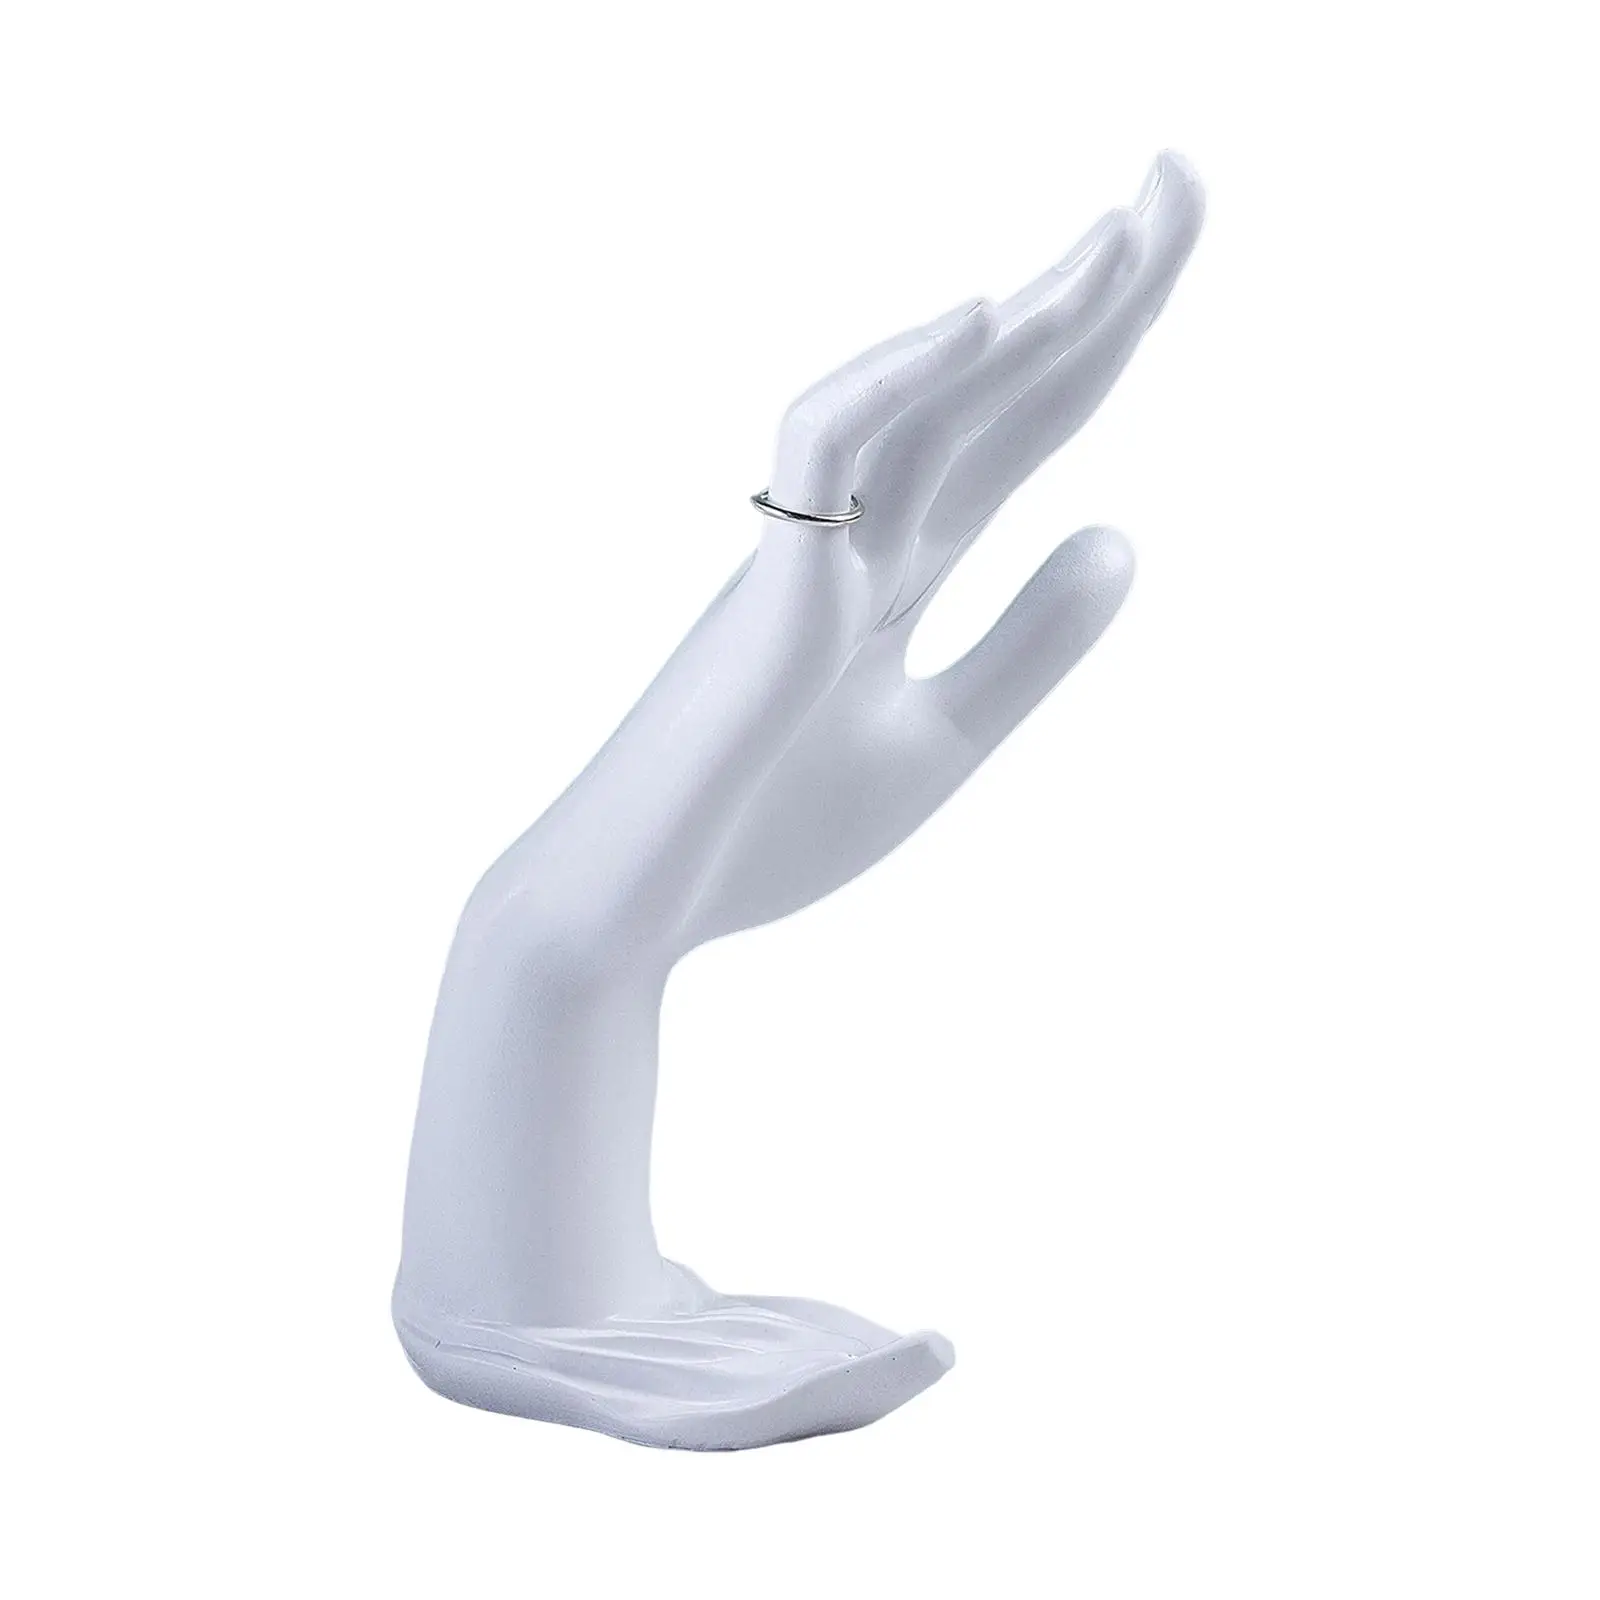 Gesture Rings Hand Holder Mannequin Hand Hand Chain Holder Show for Home